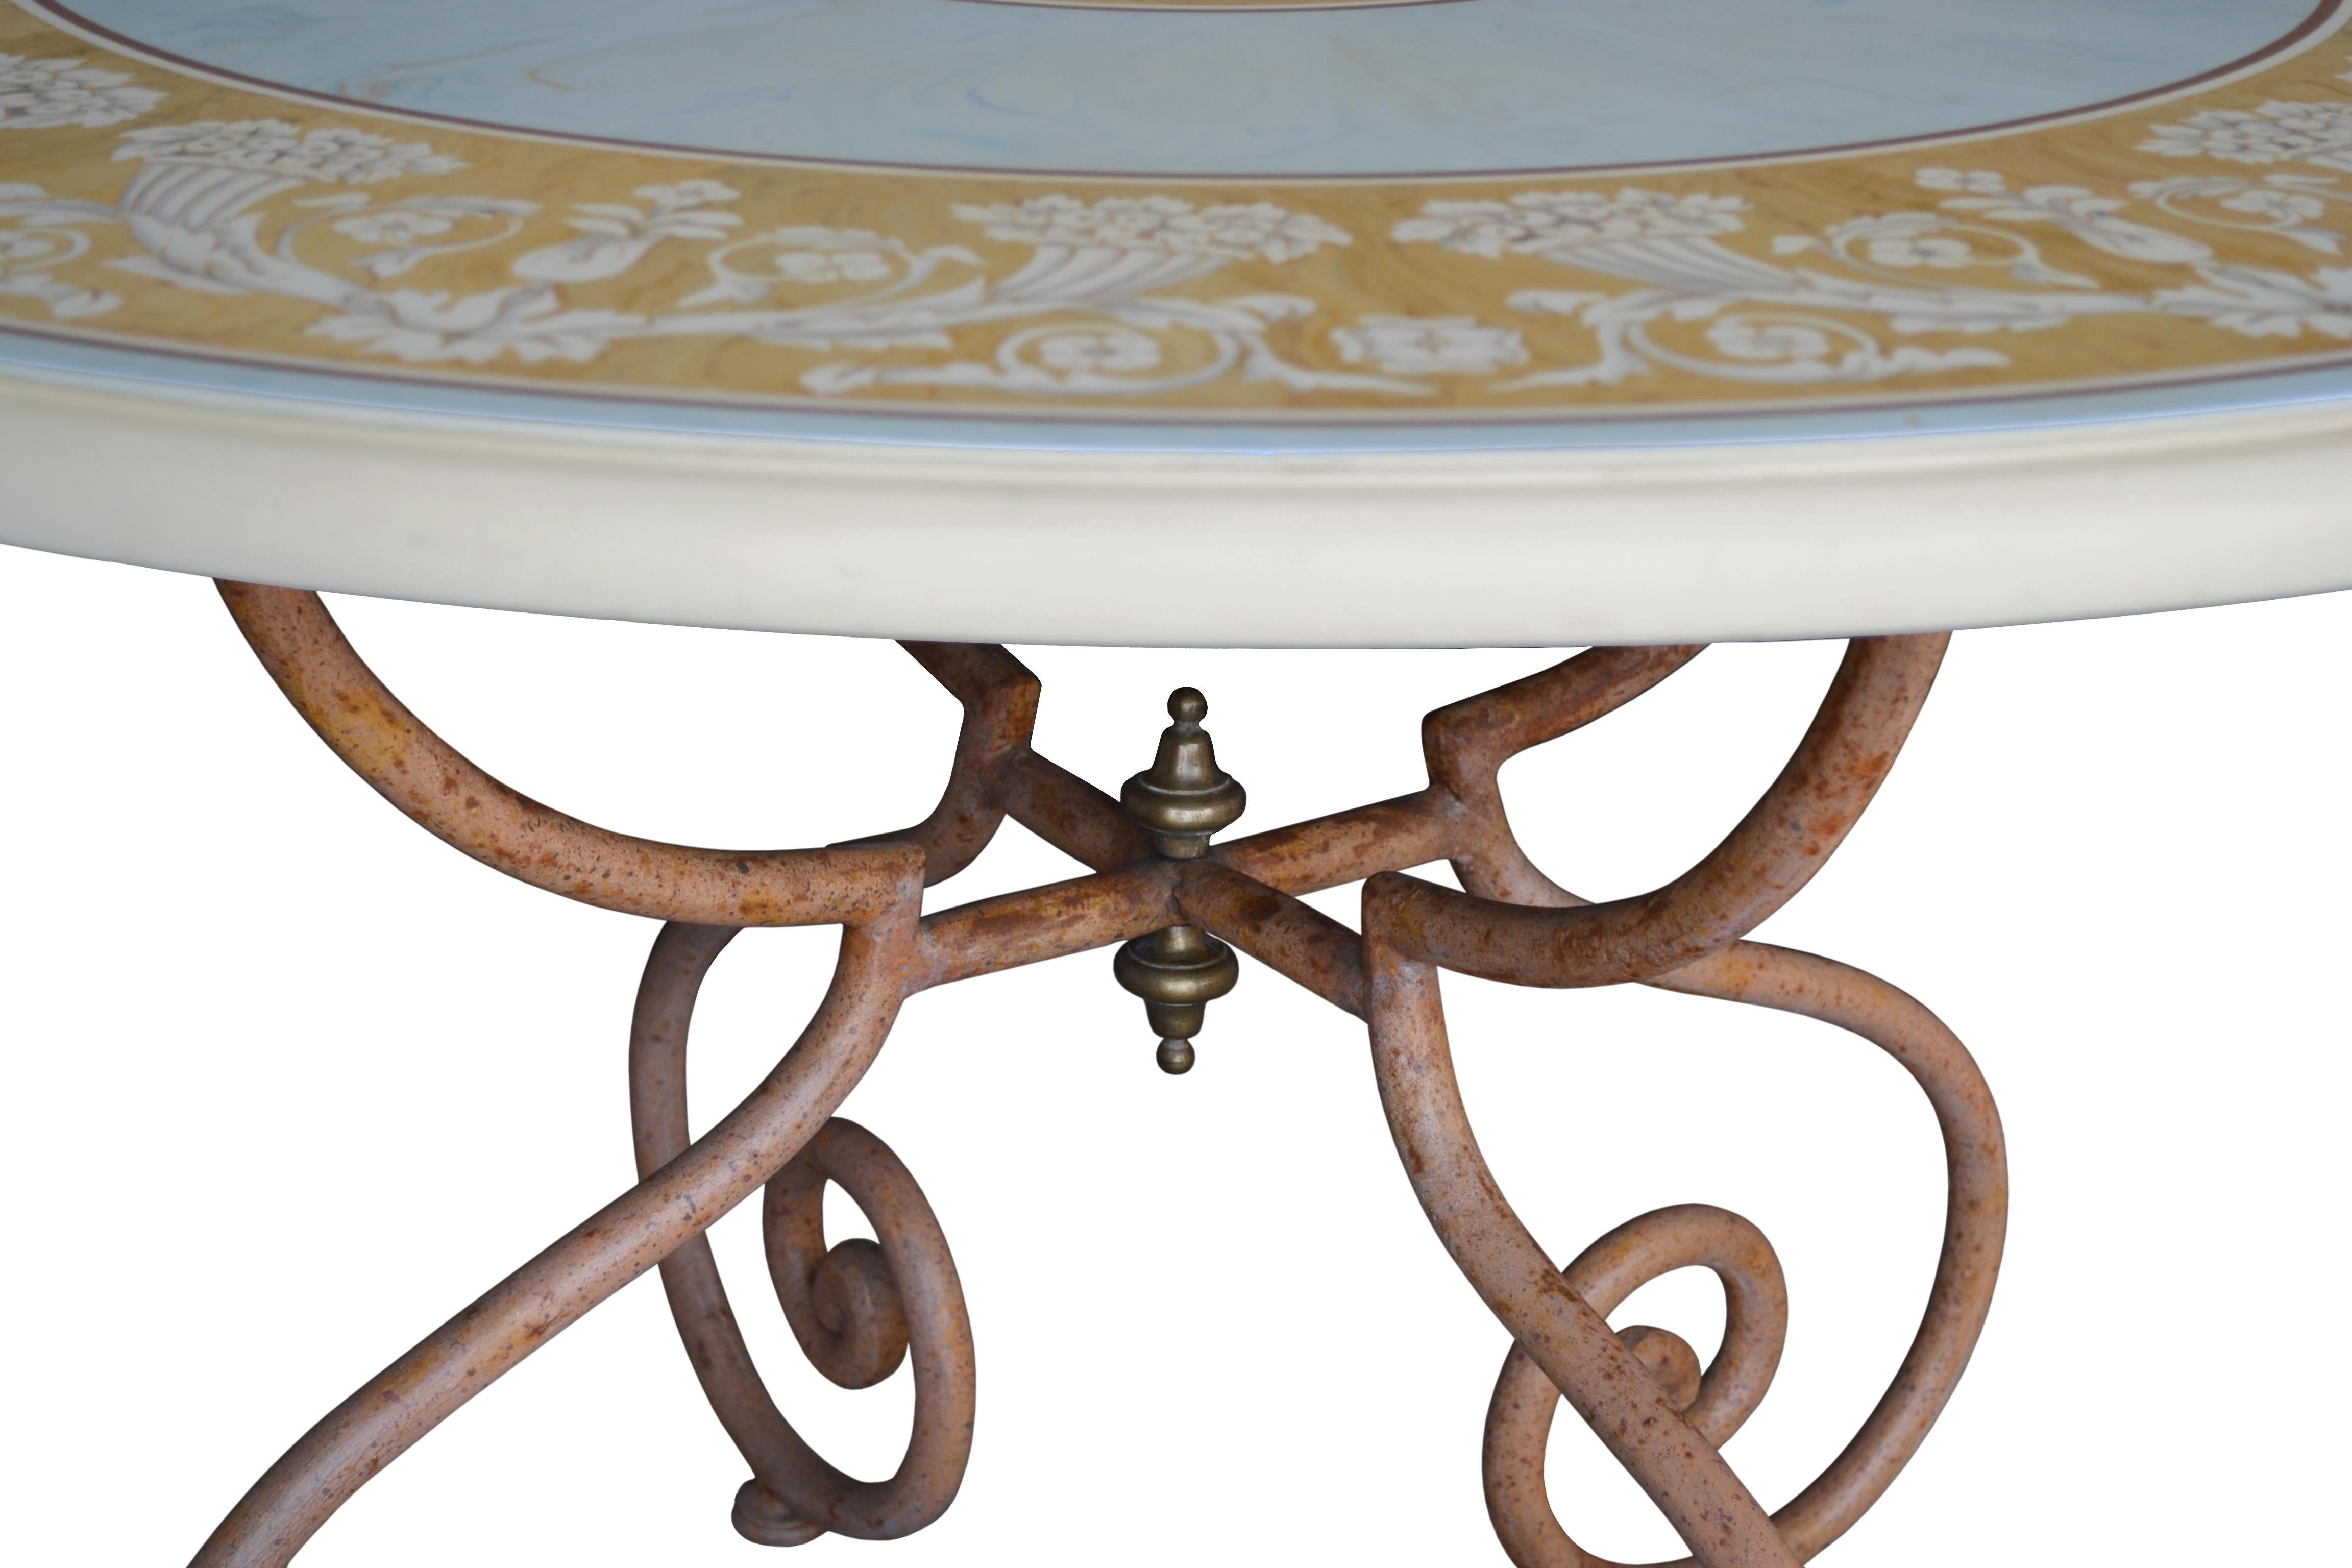 Italian Round Classic Dining Table light blue Scagliola Art Inlay Wrought Iron Base